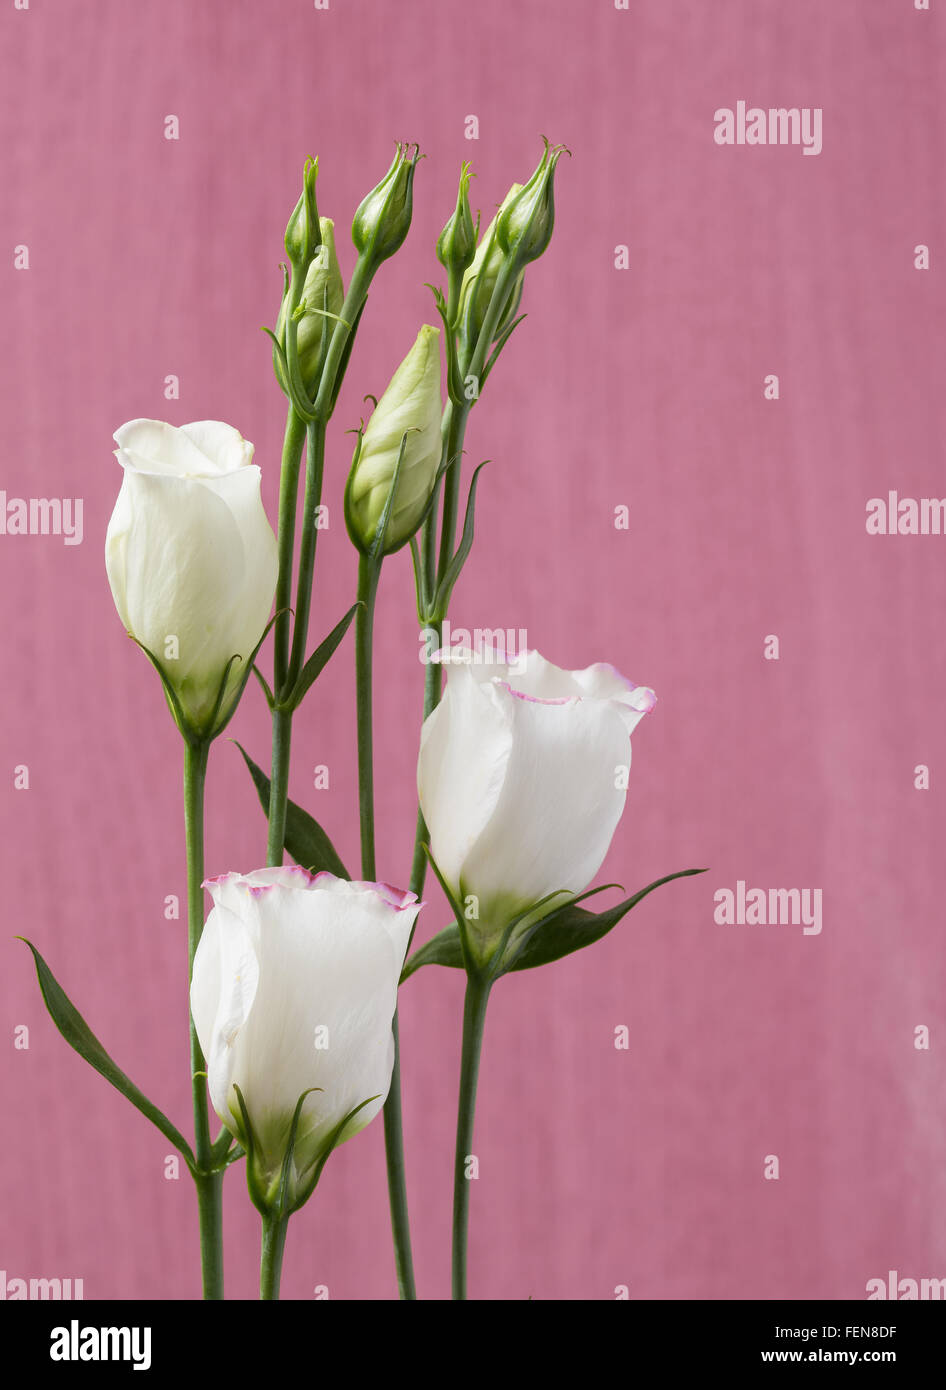 Discover our white paper lisianthus flower